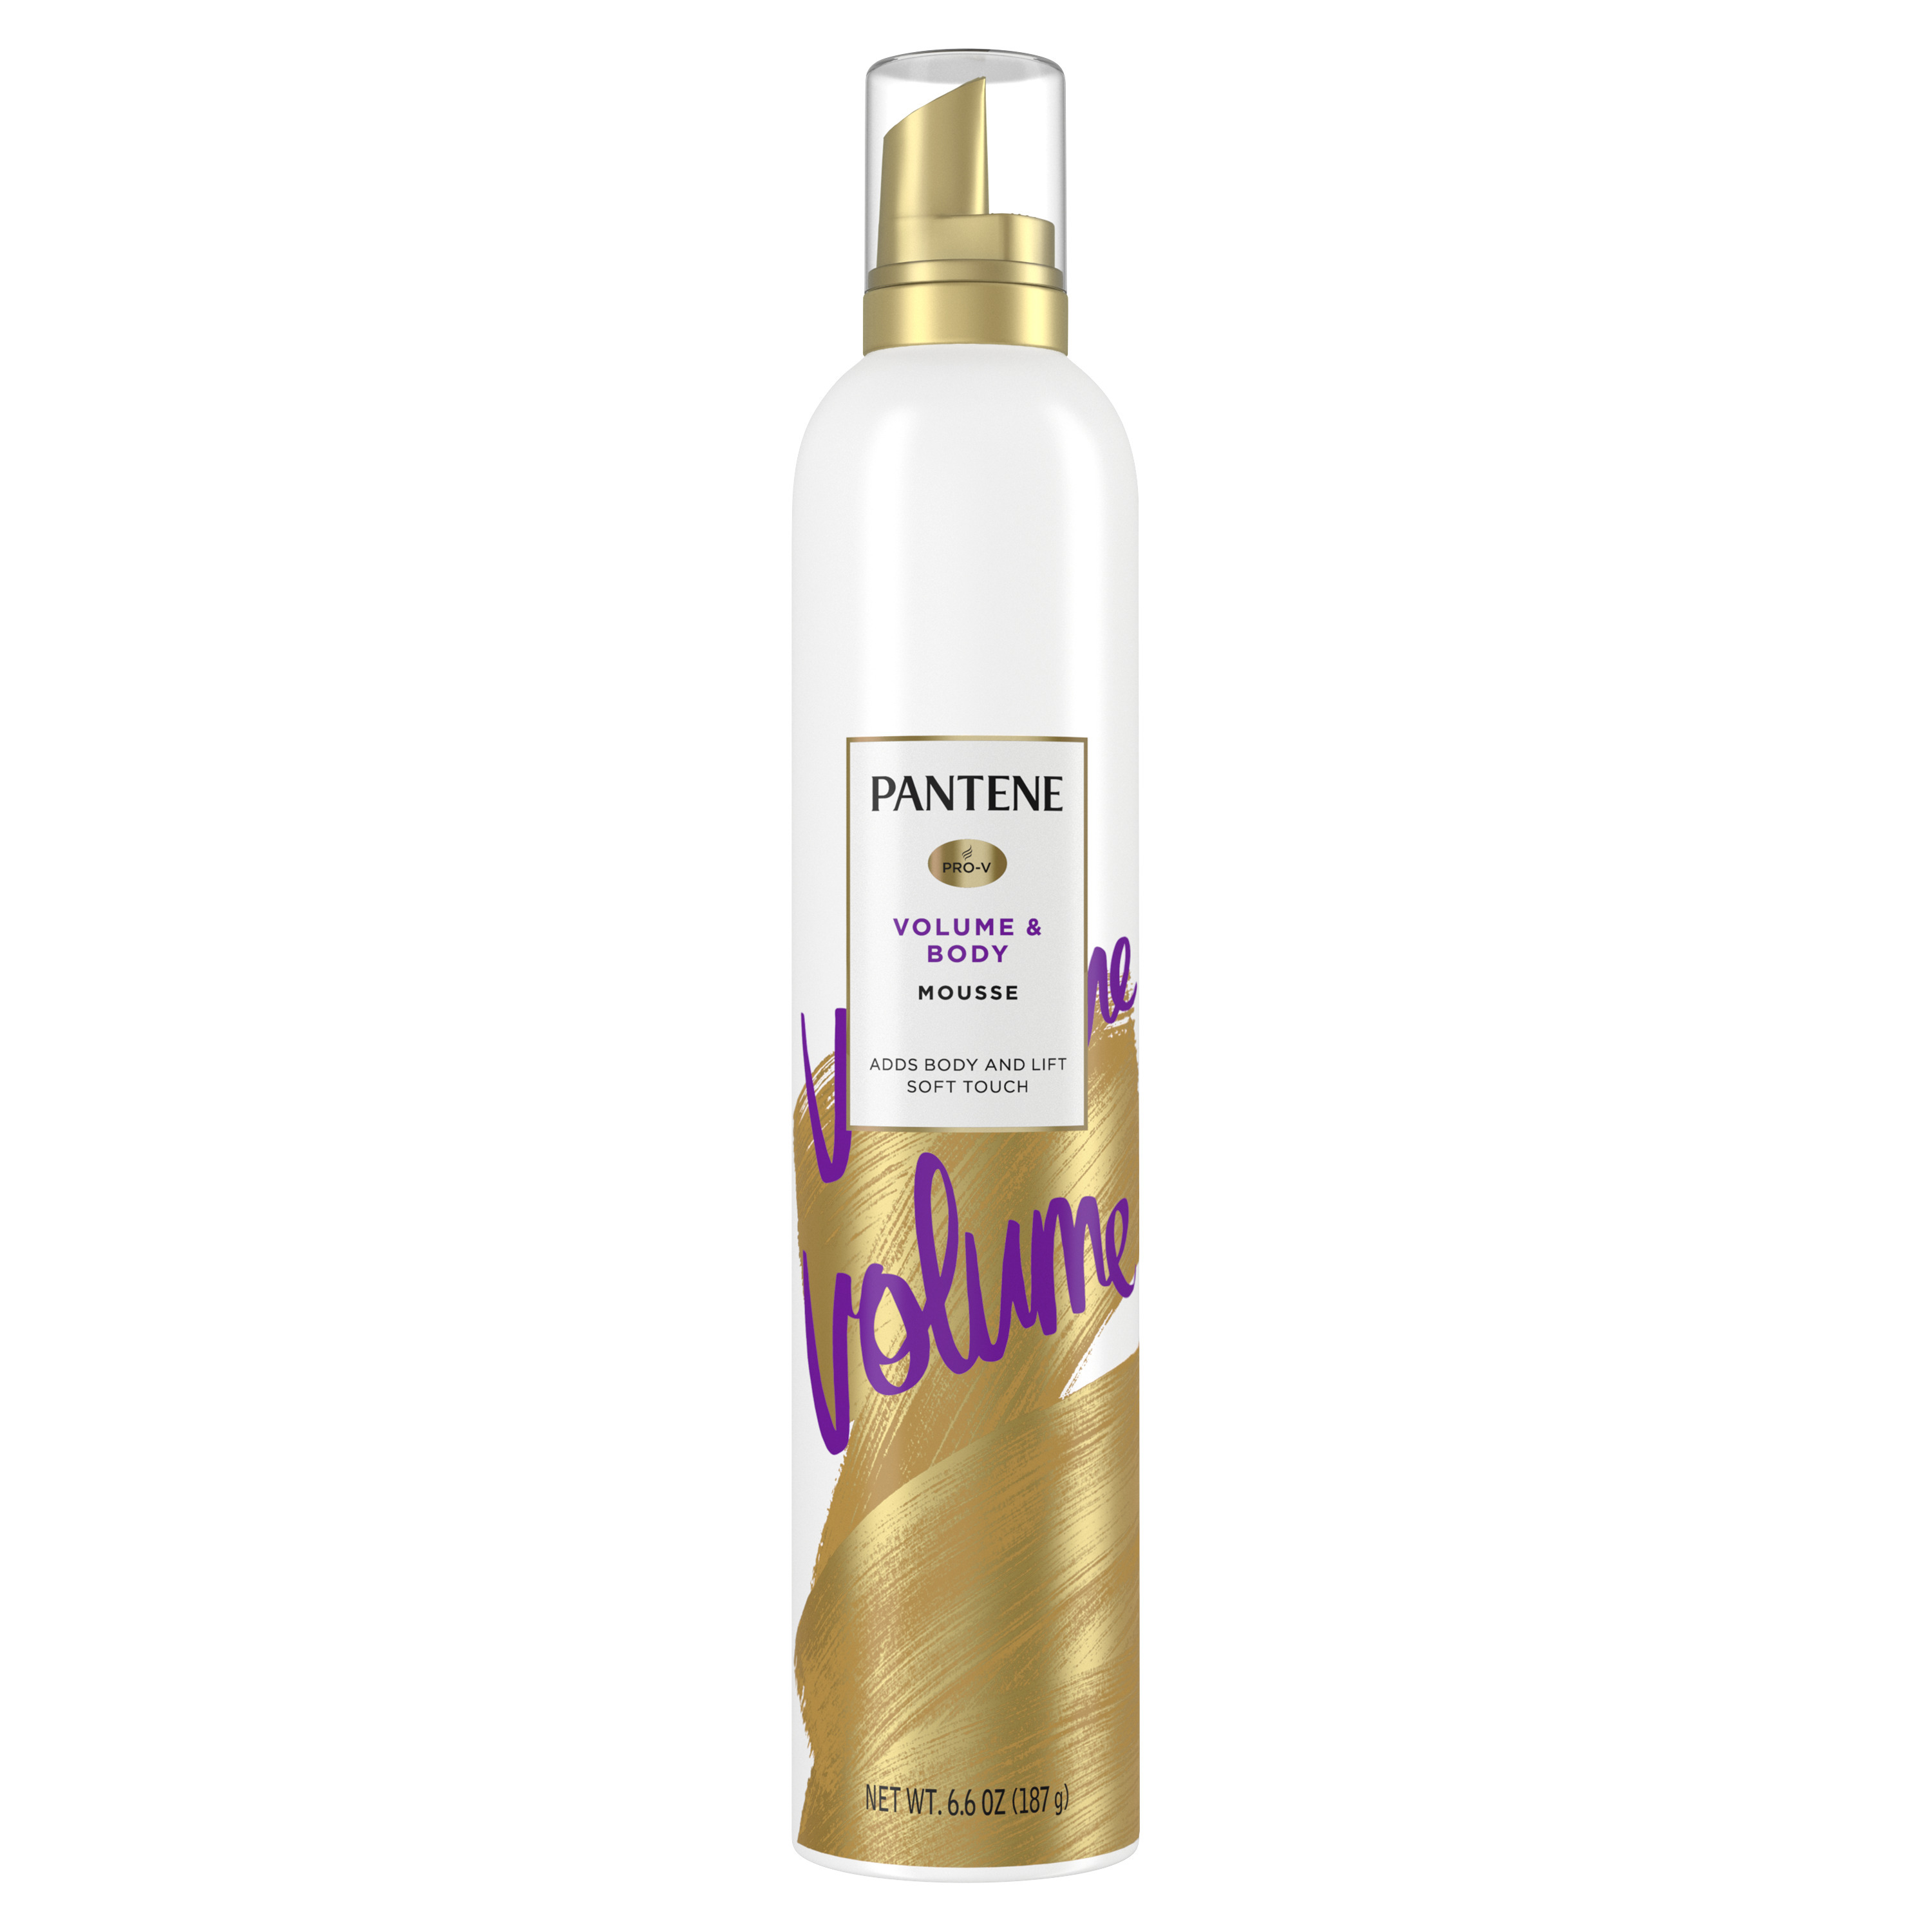 Pantene Volume Mousse, Boosts Fine Flat Hair for Max Fullness, 6.6 oz - image 3 of 12